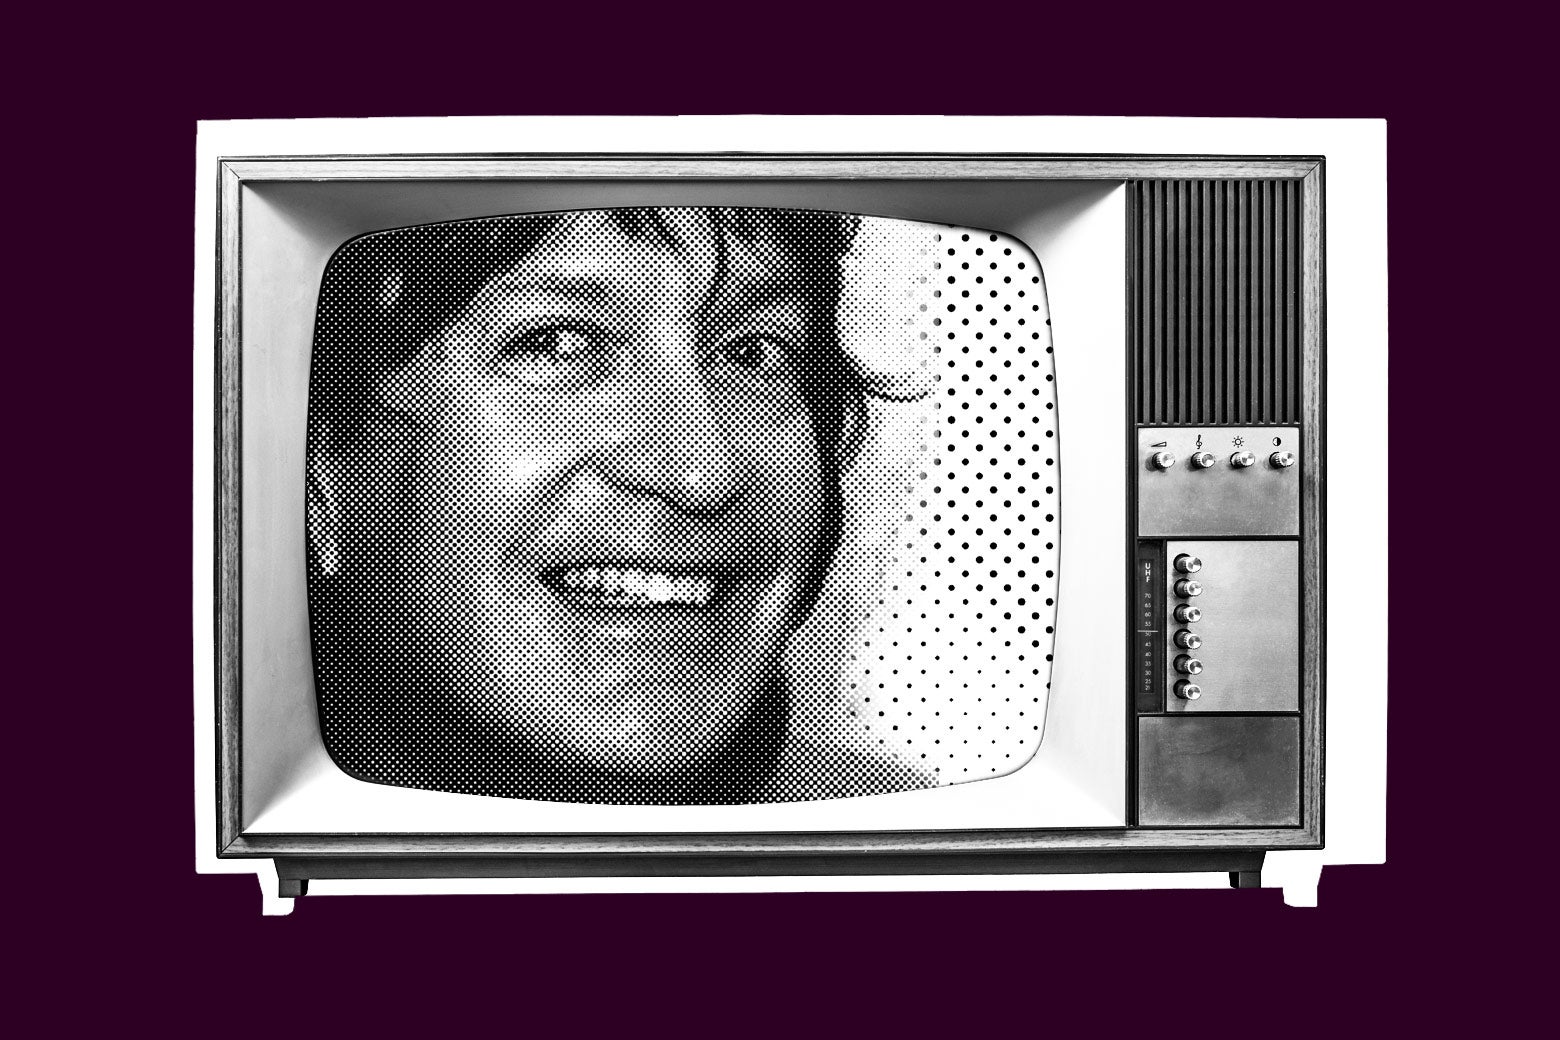 Photo illustration of Dick Richards' face on an old TV.